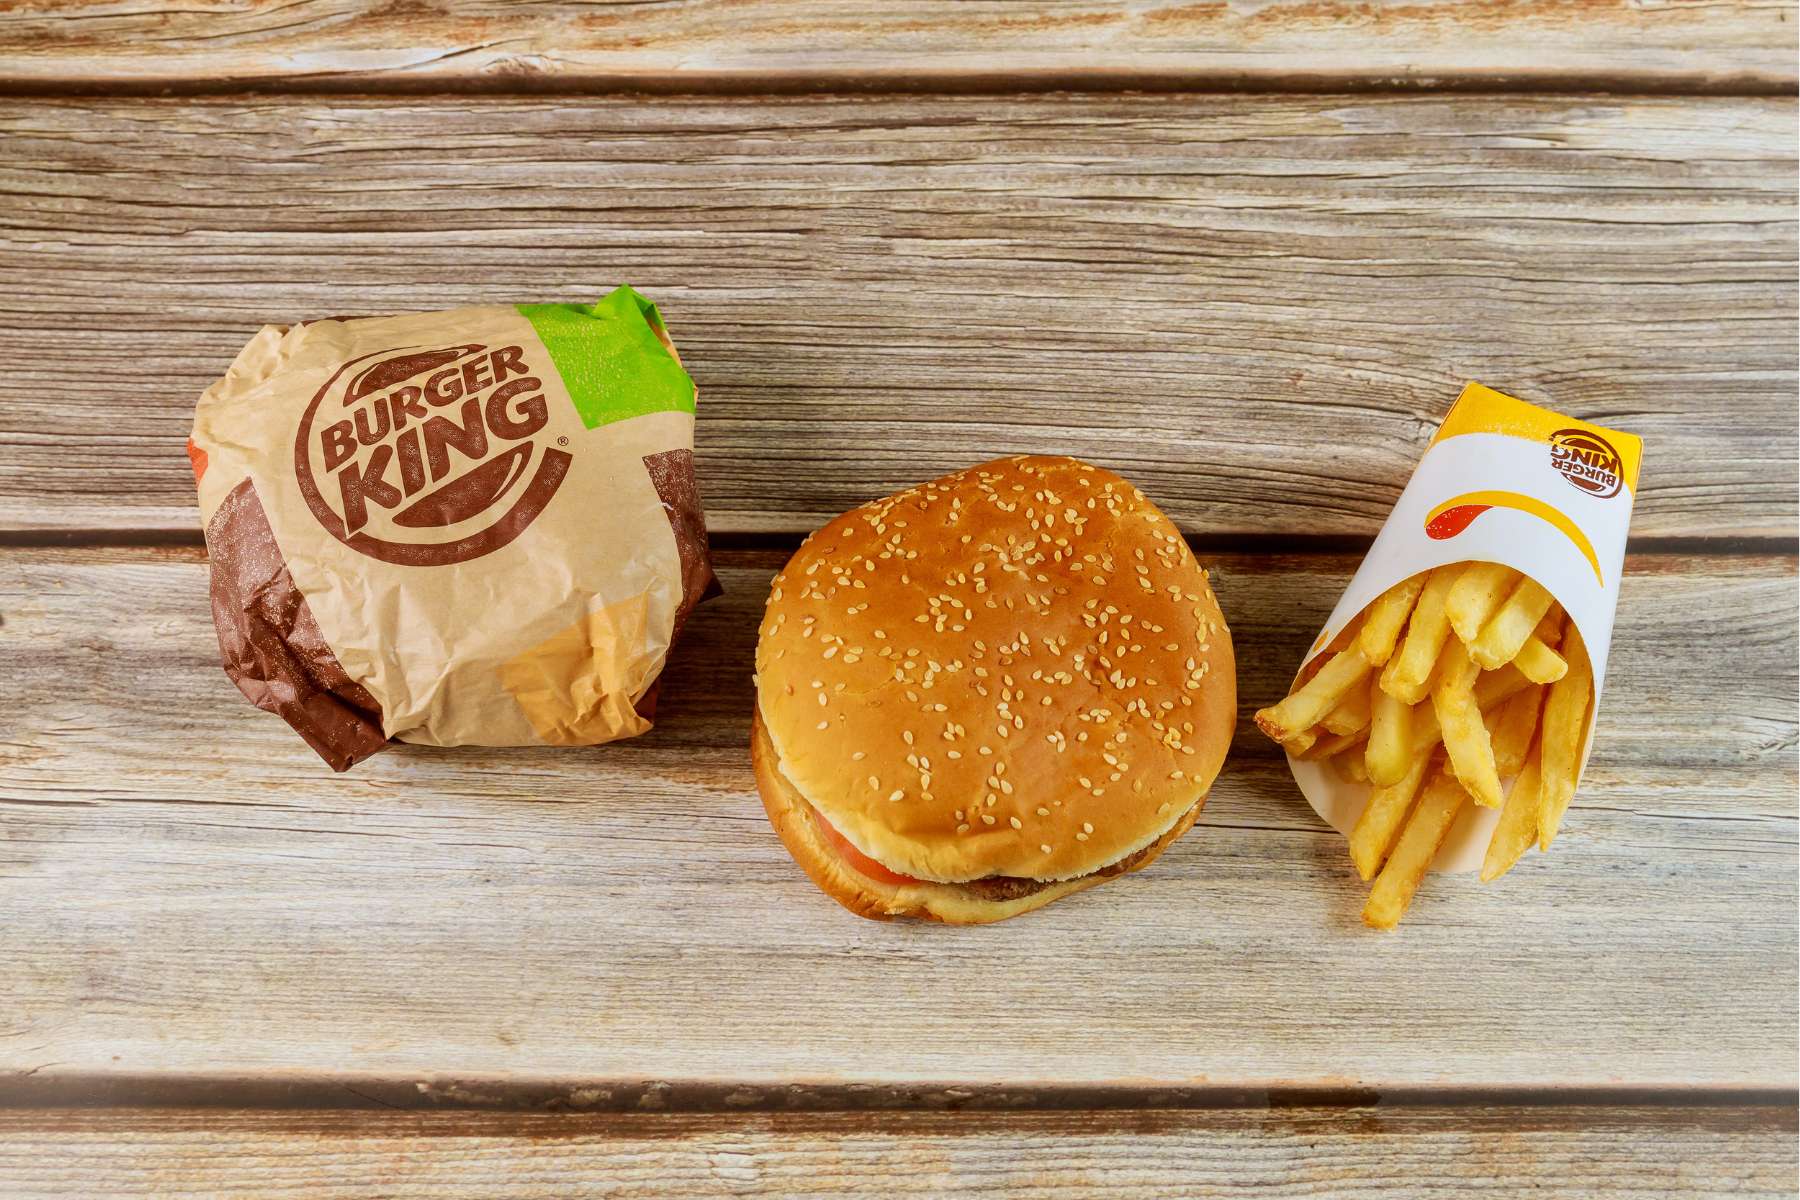 An array of Burger King foods including a wrapped burger, an unwrapped burger and container of fries are sitting on a wooden table.